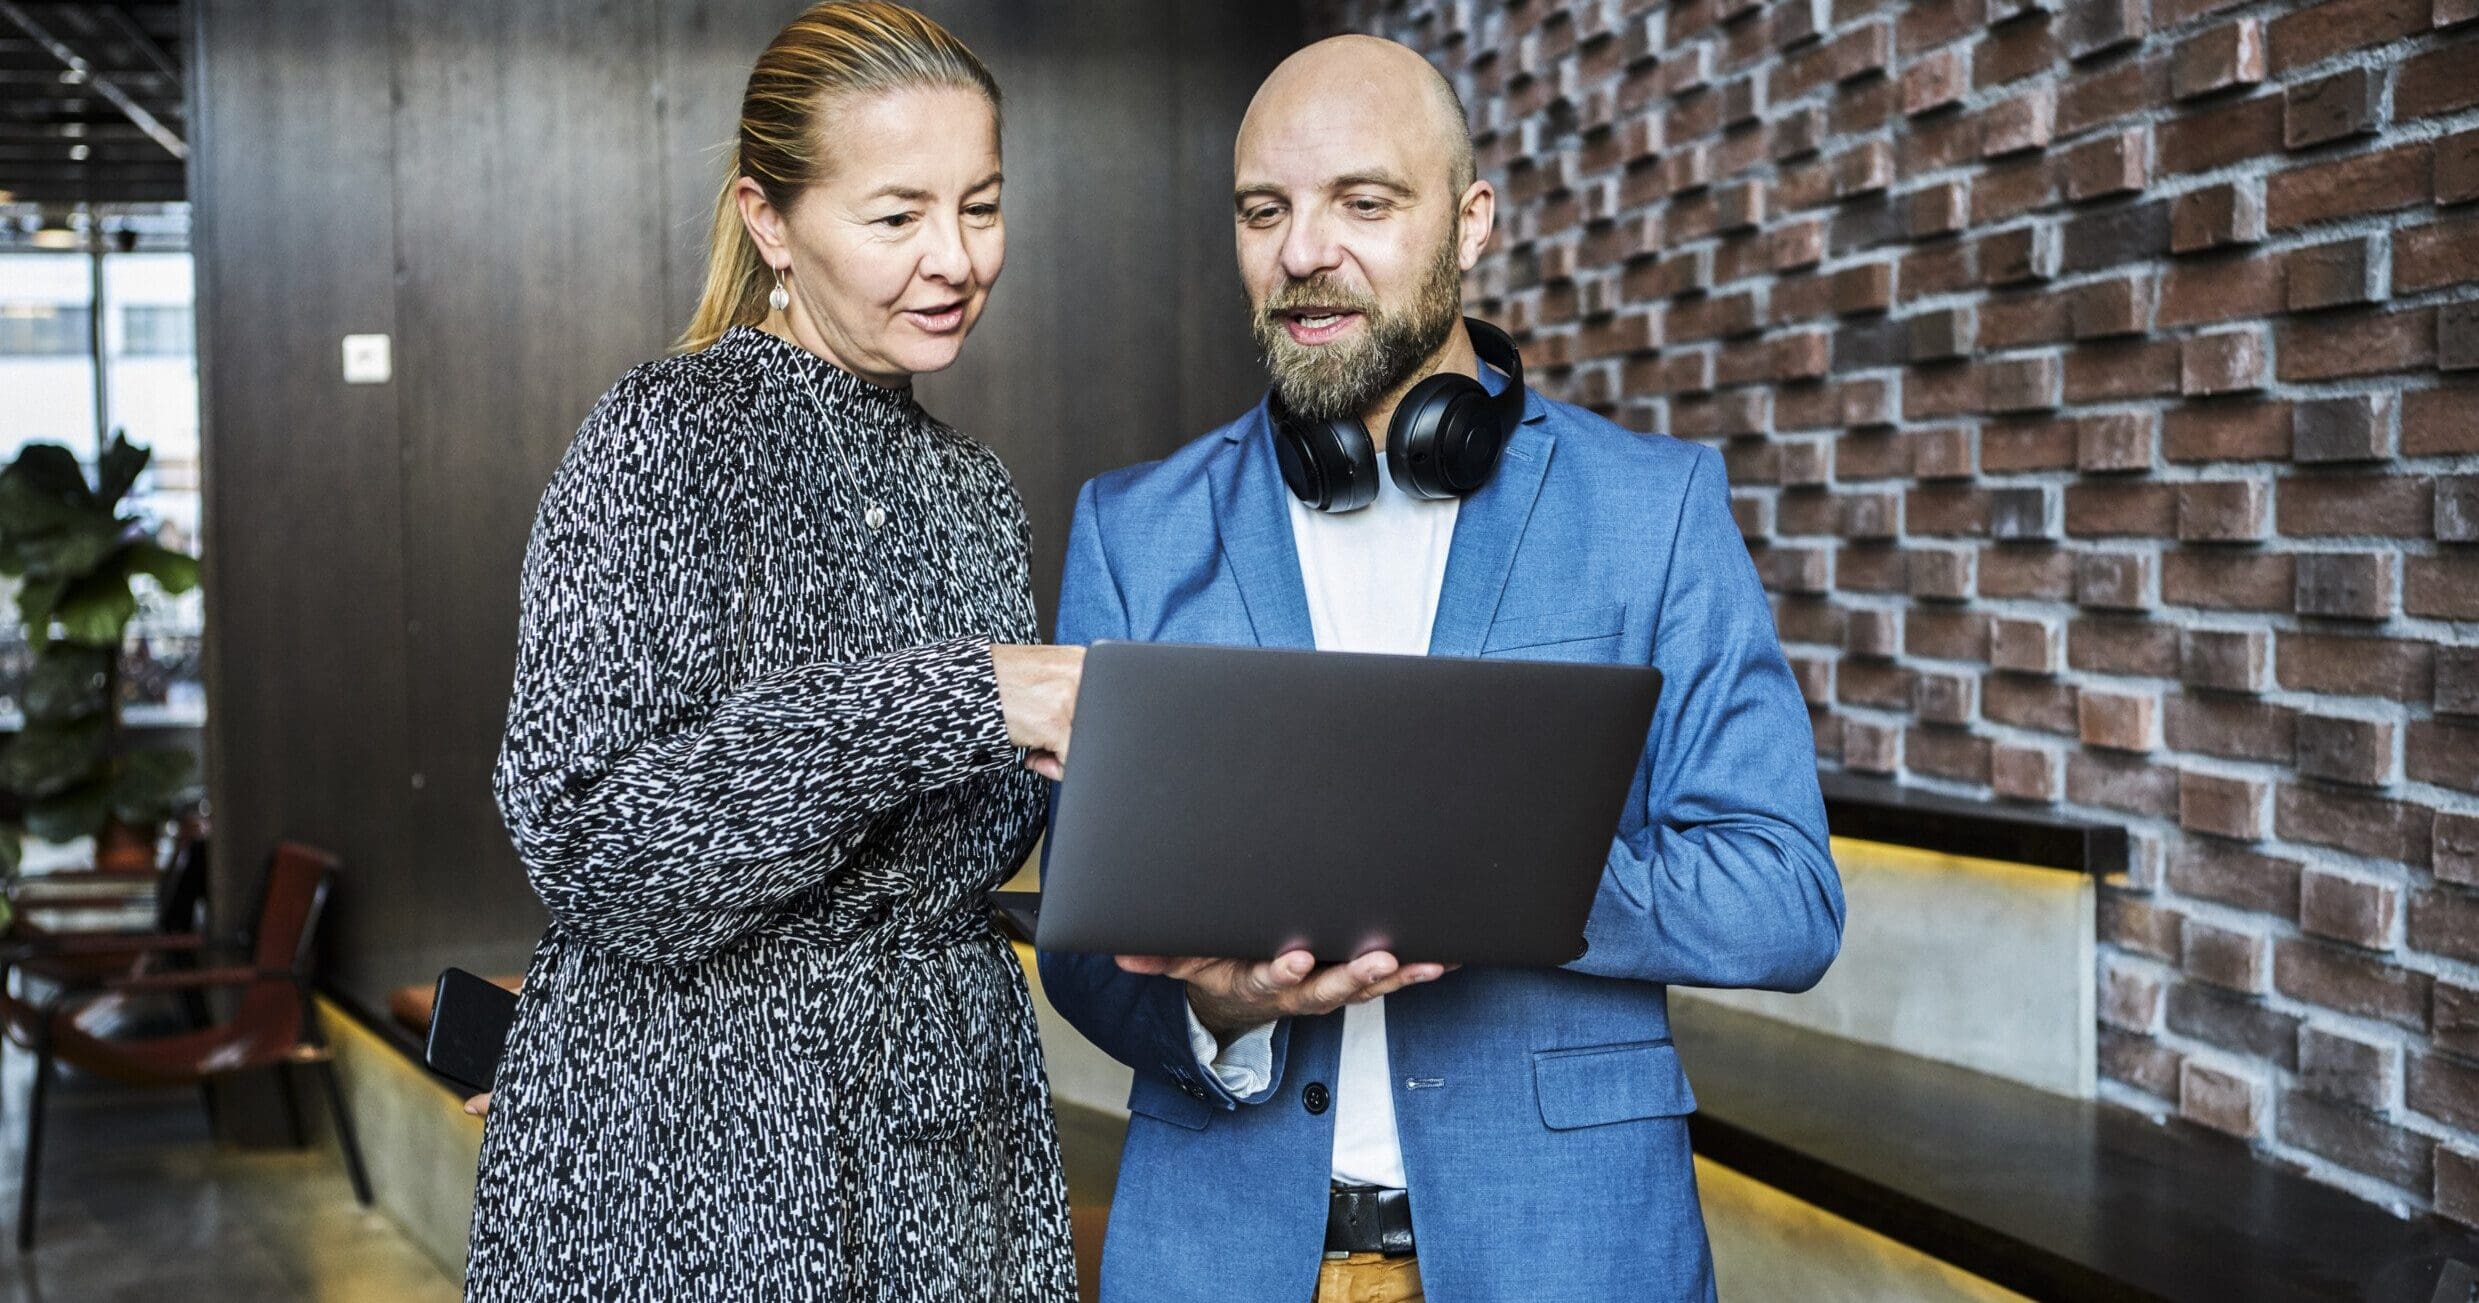 Standing inside an open office space with a red brick wall behind them, a man and a woman stand talking whilst looking and pointing at a laptop the man is holding.